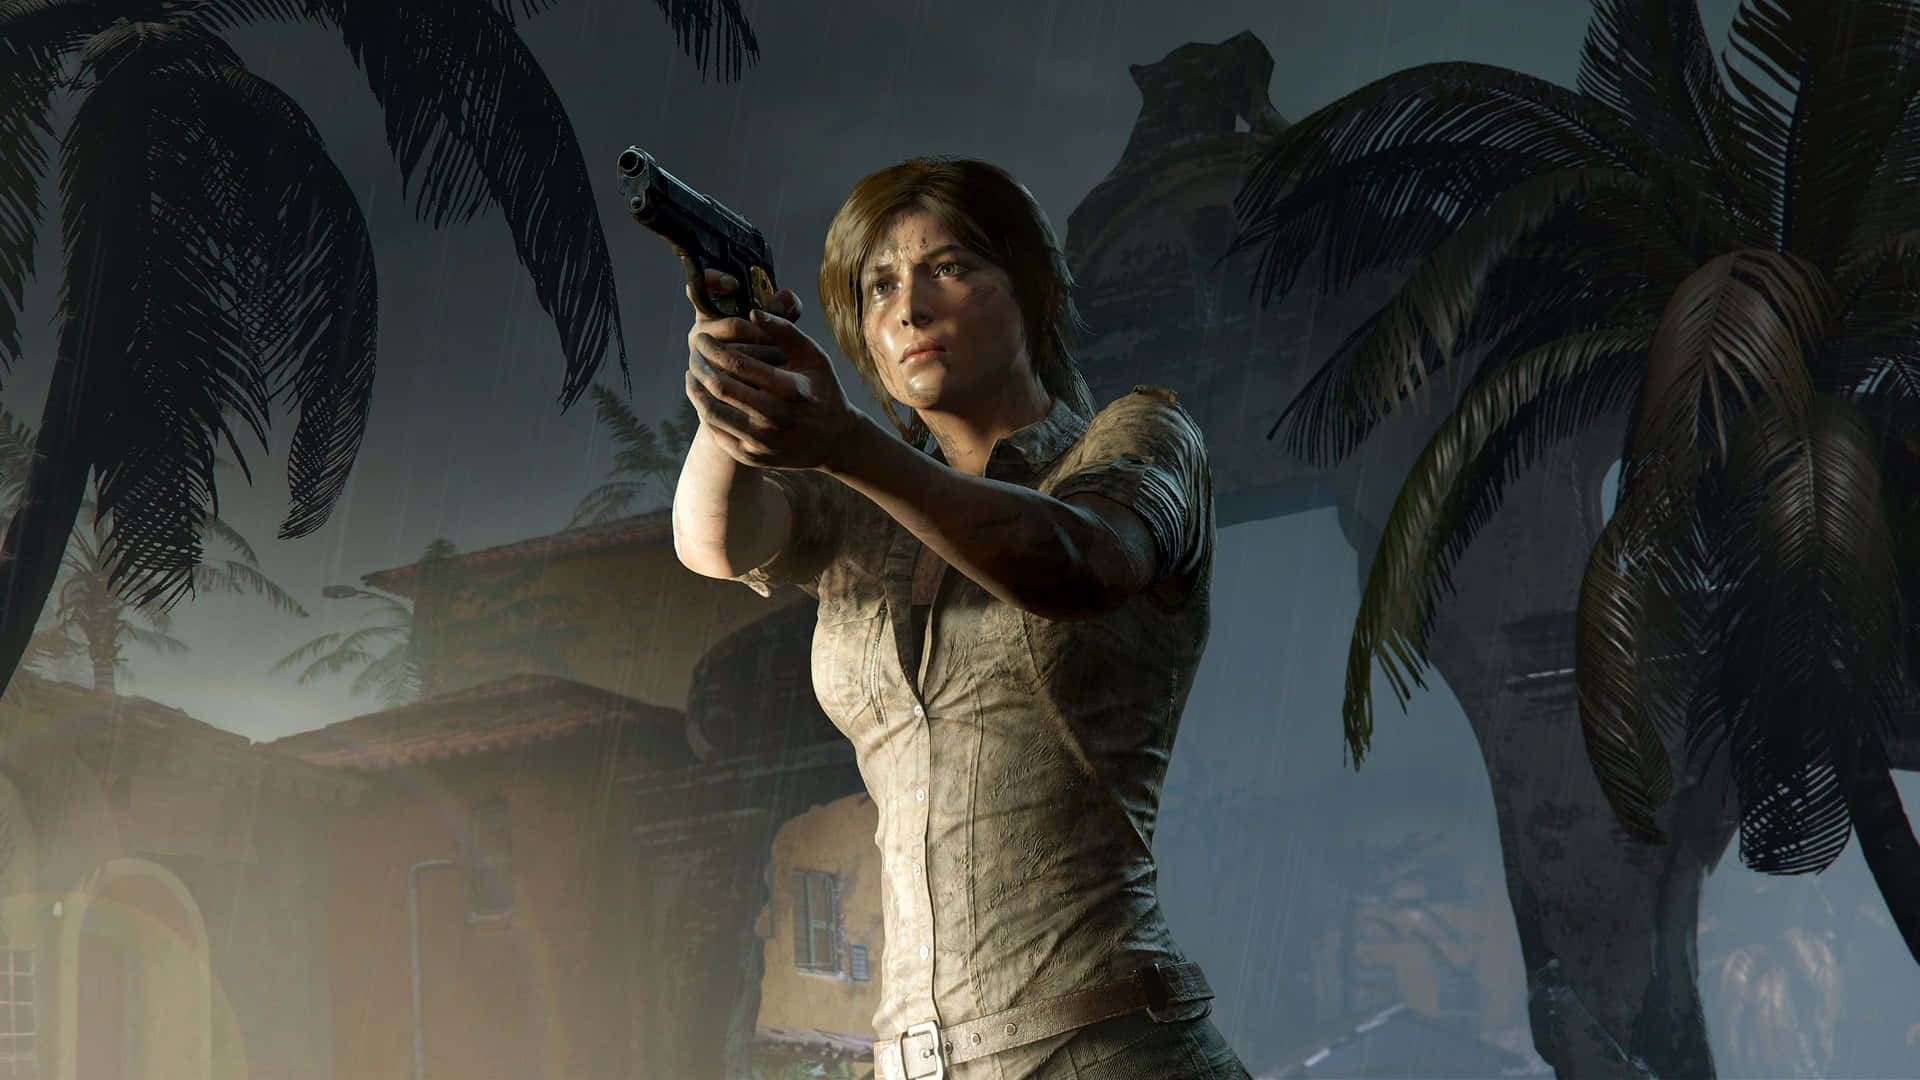 Lara Croft, The Iconic Adventurer, Explores The Mystery Of The Jungle In Shadow Of The Tomb Raider